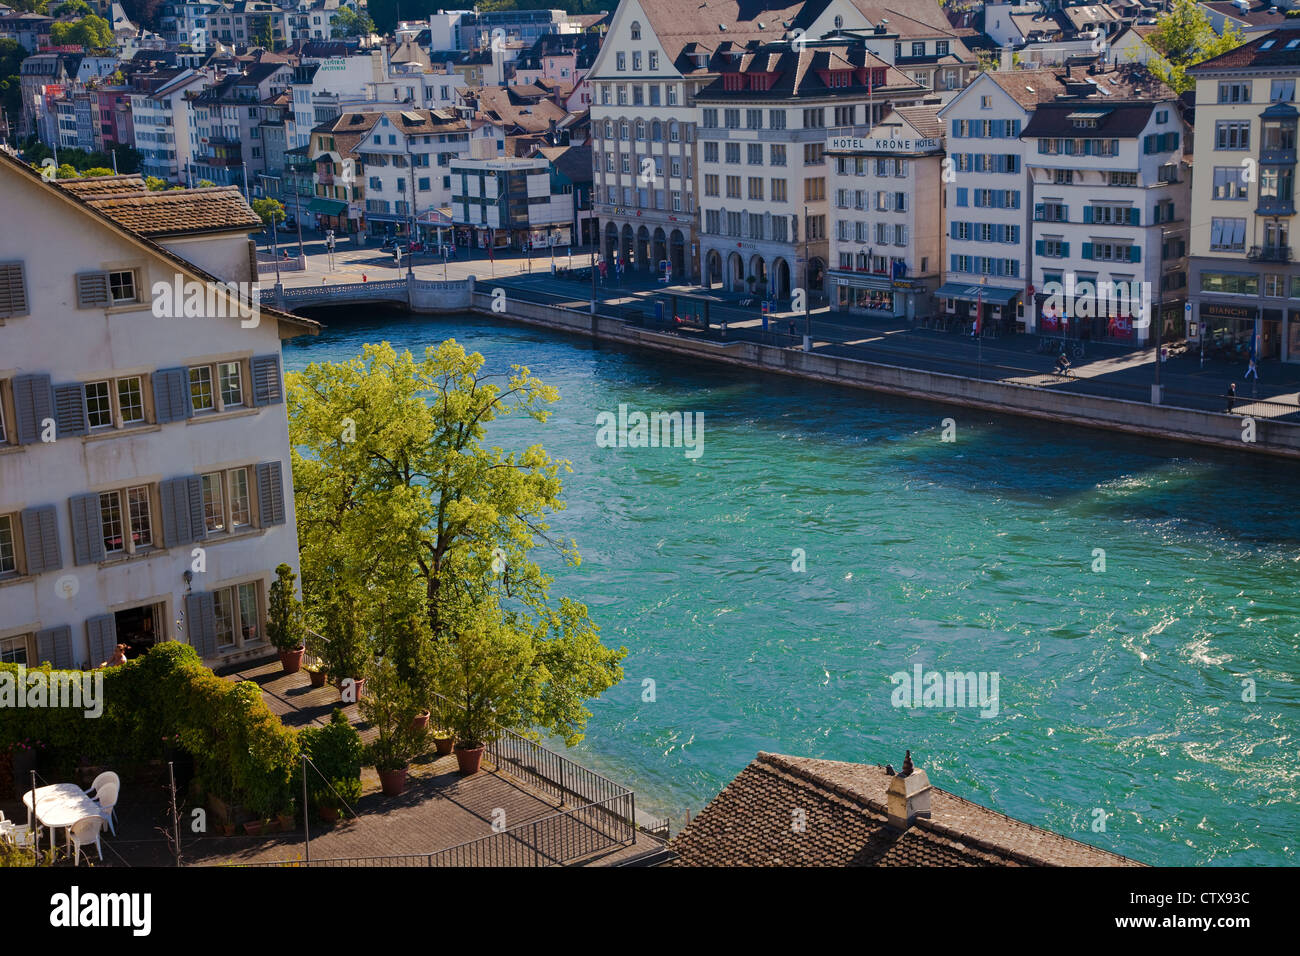 A view of the Limmat river flowing through the city of Zurich, Switzerland Stock Photo